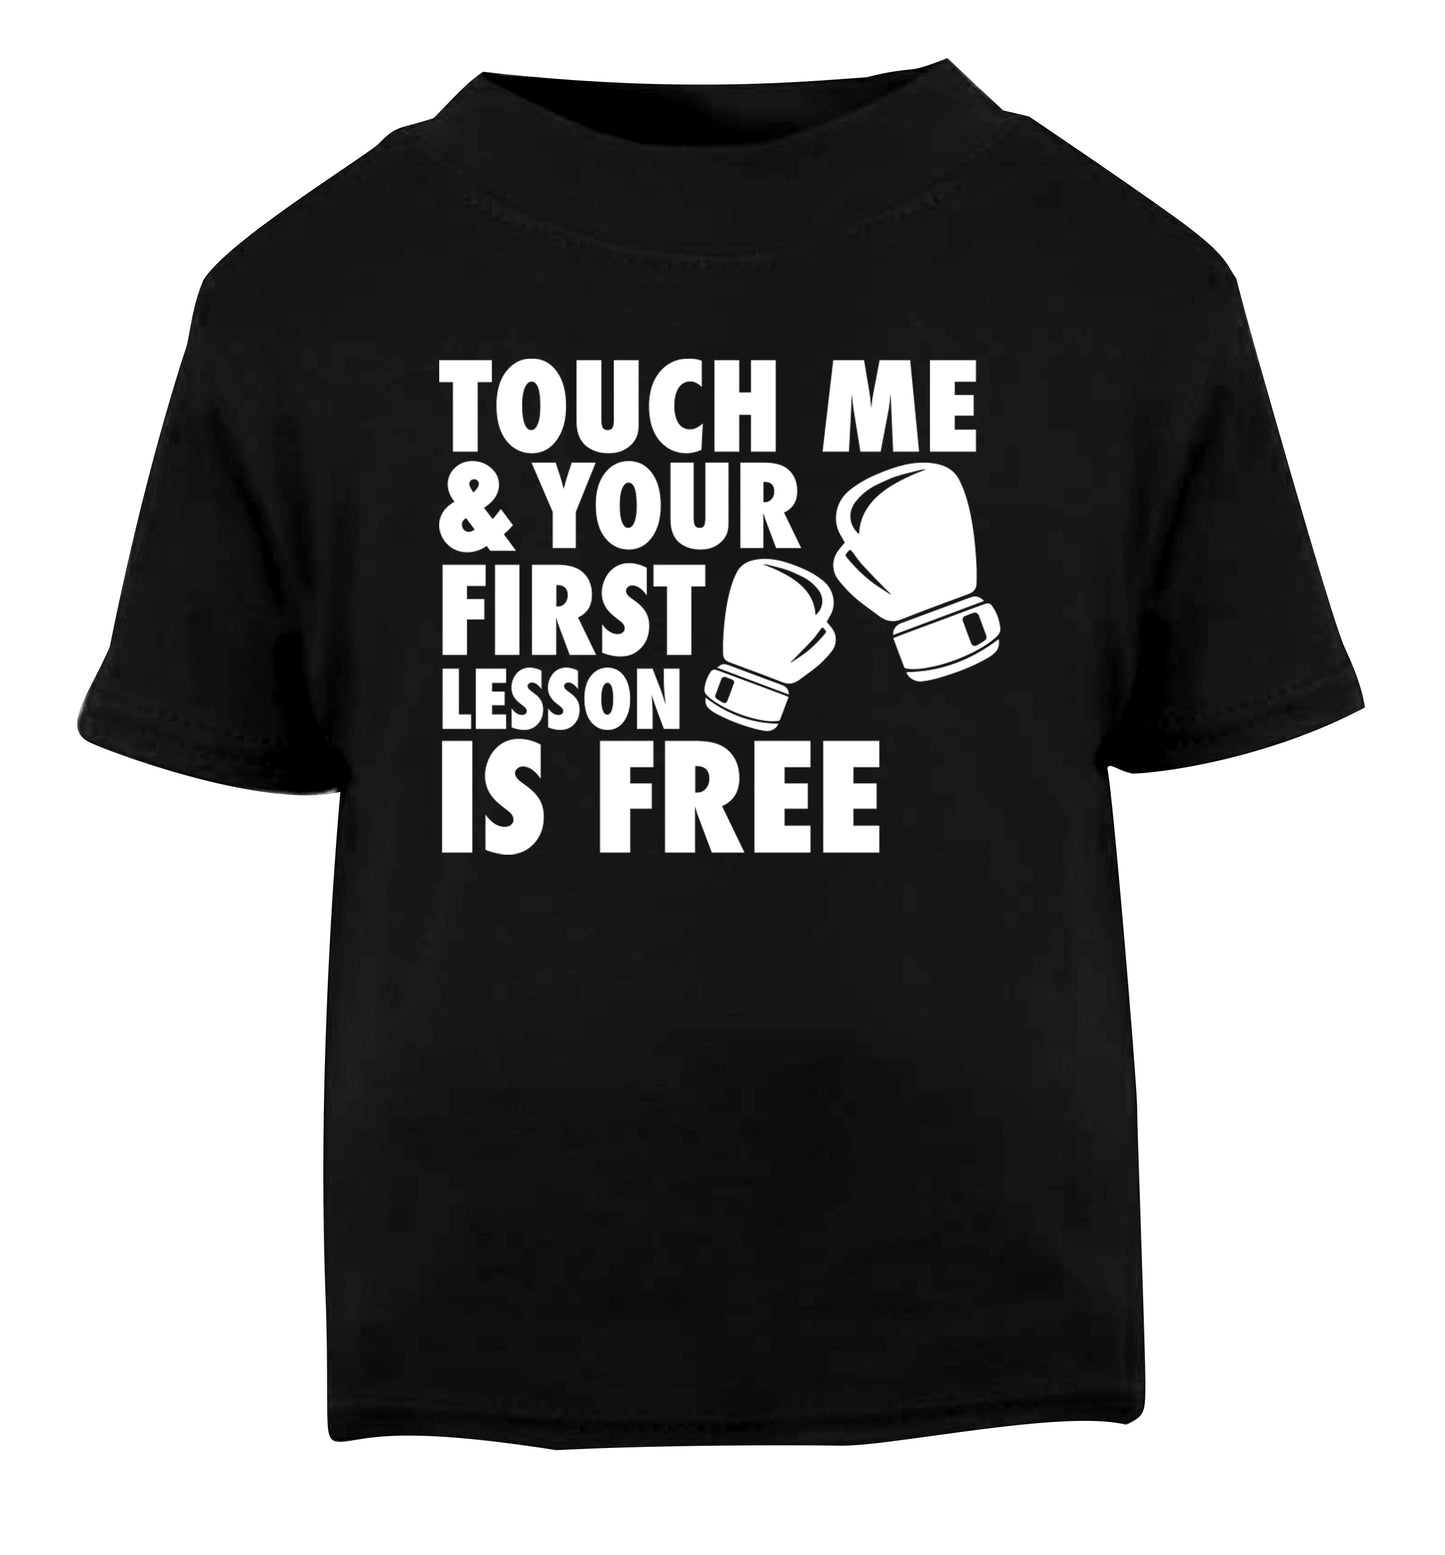 Touch me and your First Lesson is Free  Black Baby Toddler Tshirt 2 years